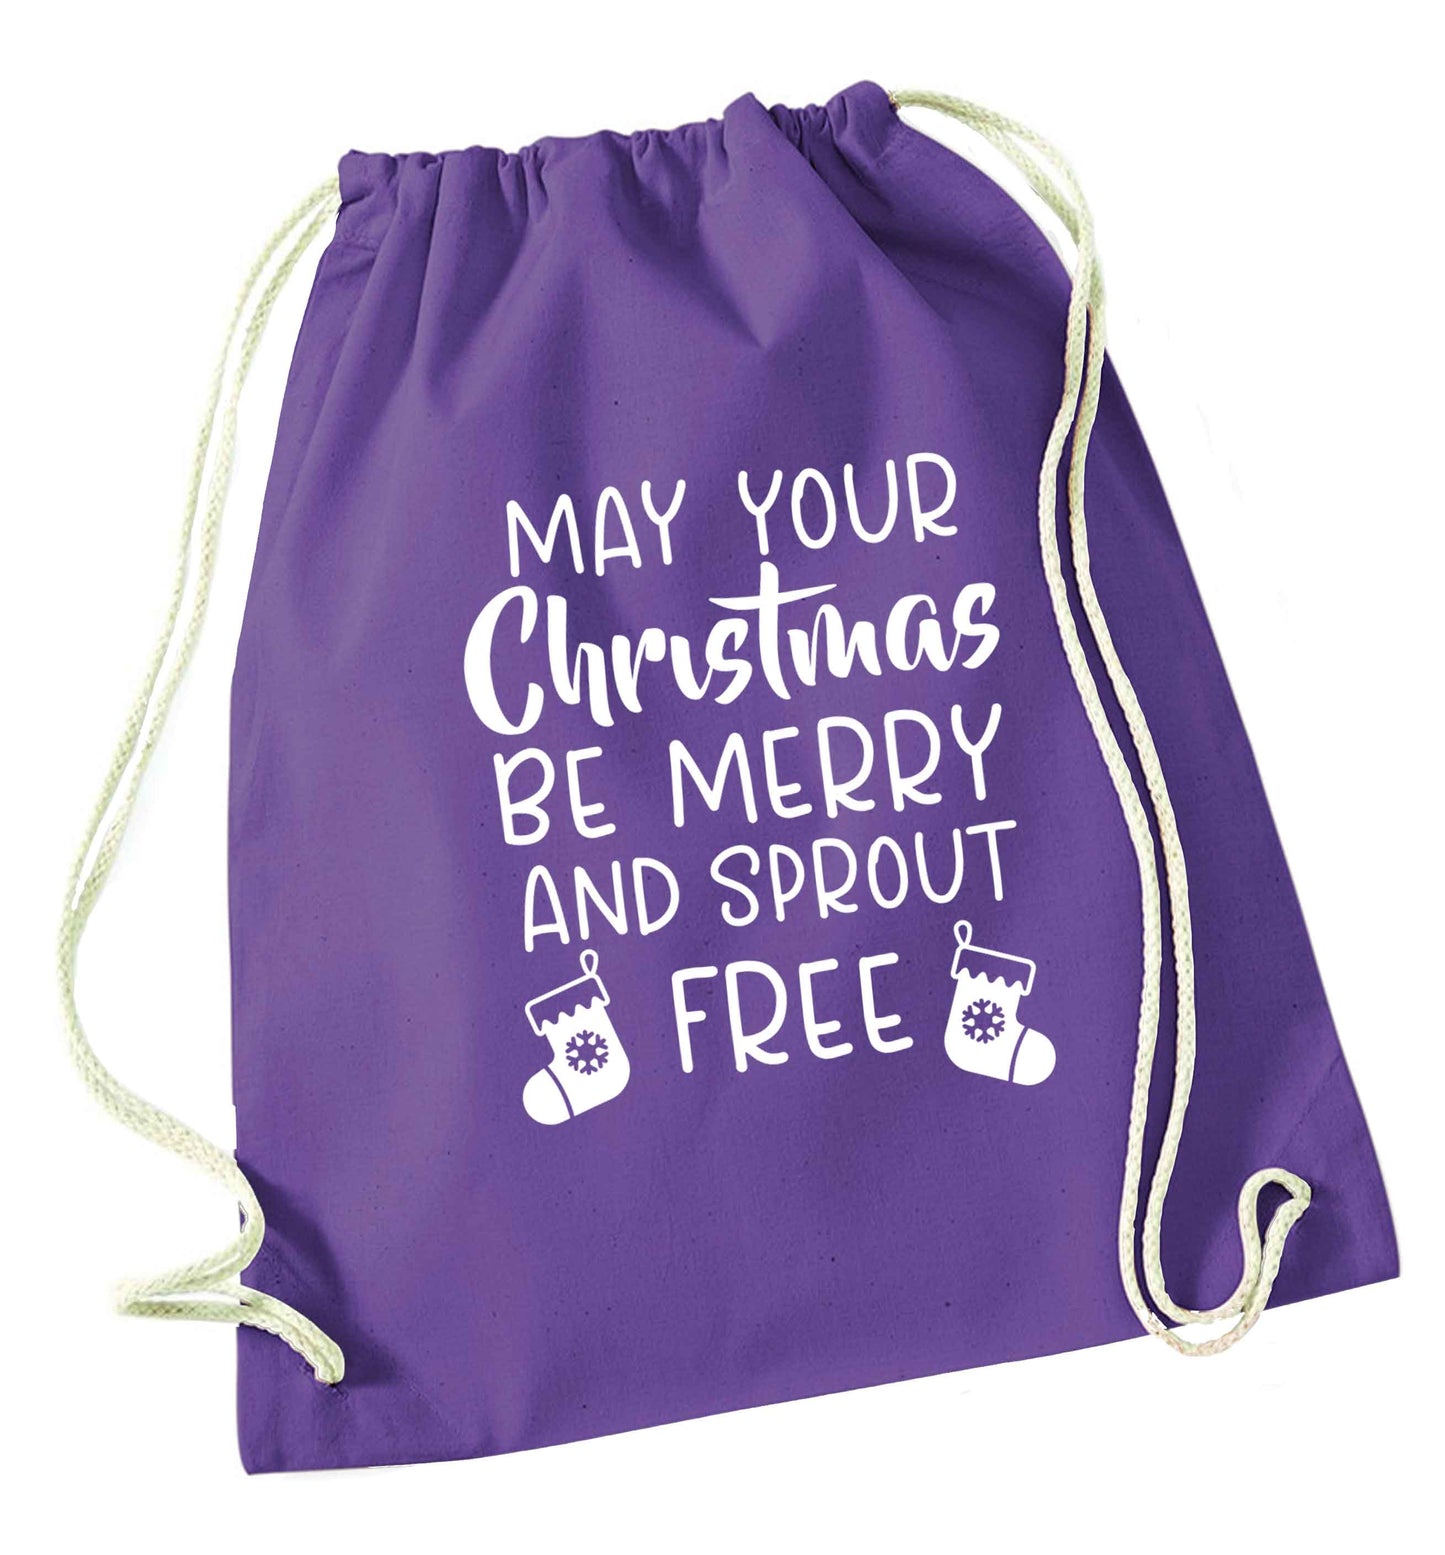 May your Christmas be merry and sprout free purple drawstring bag